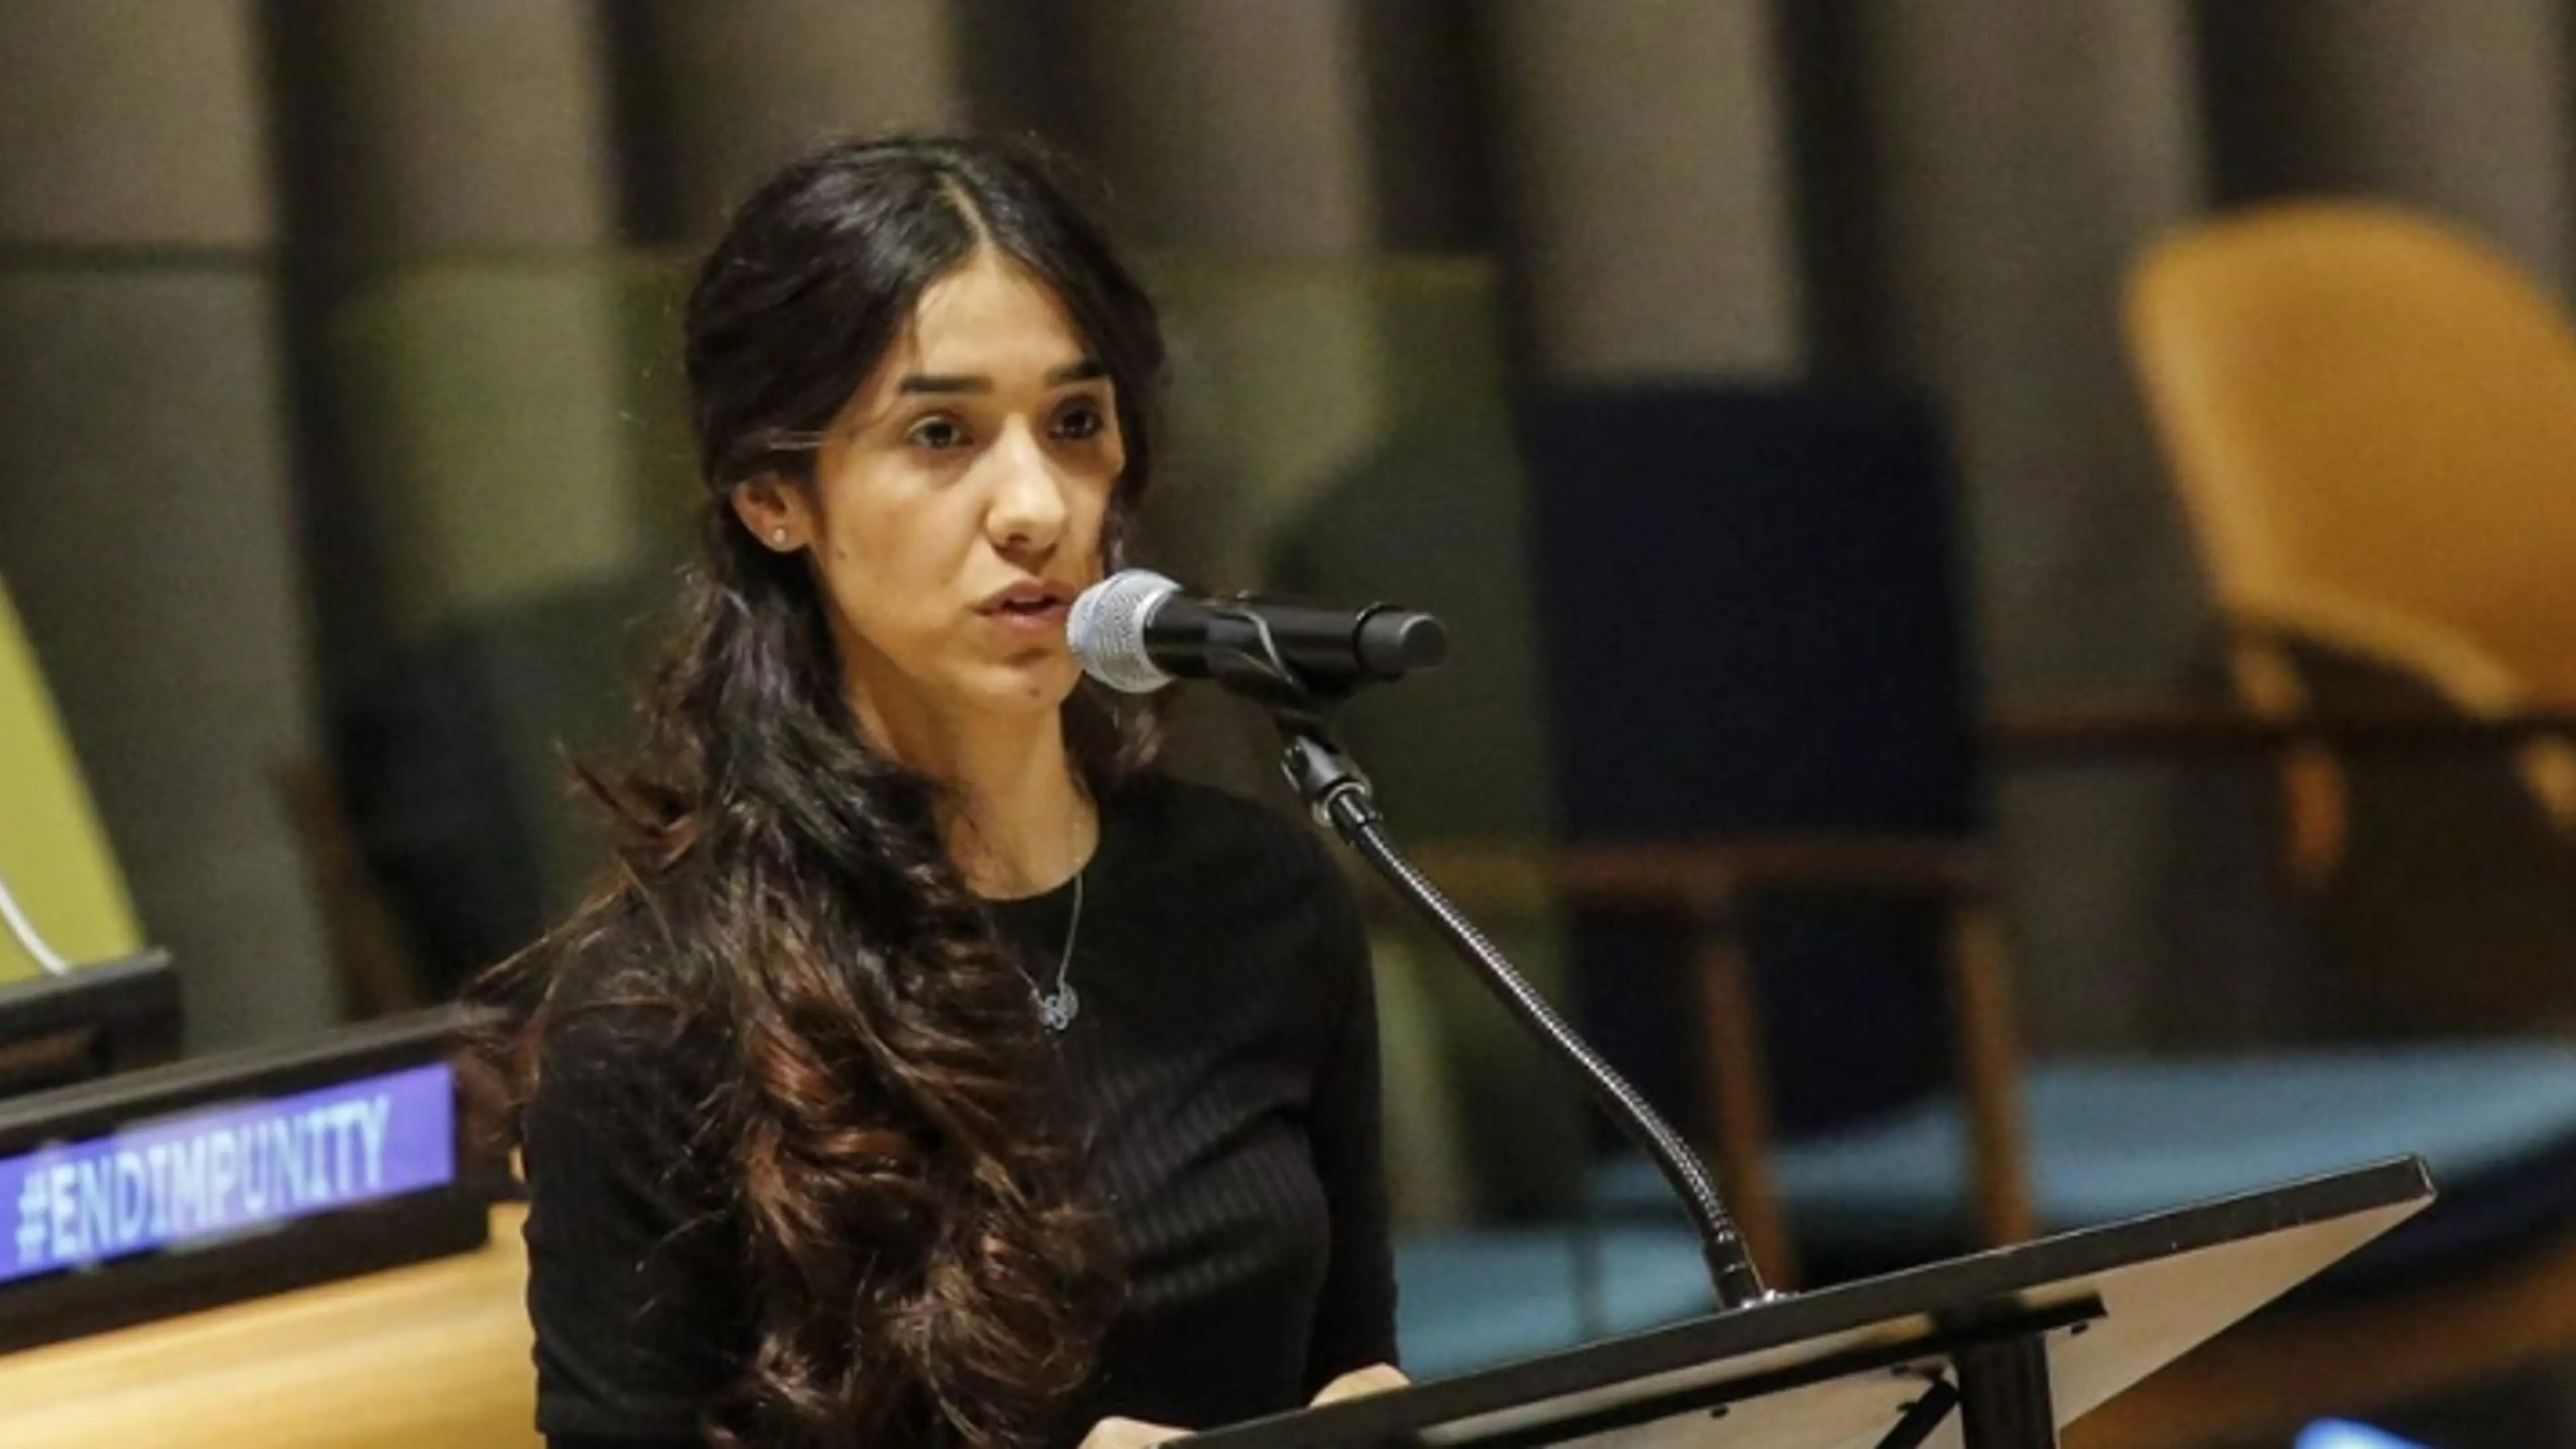 From an ISIS sex slave to the co-recipient of Nobel Peace Prize, meet Nadia Murad